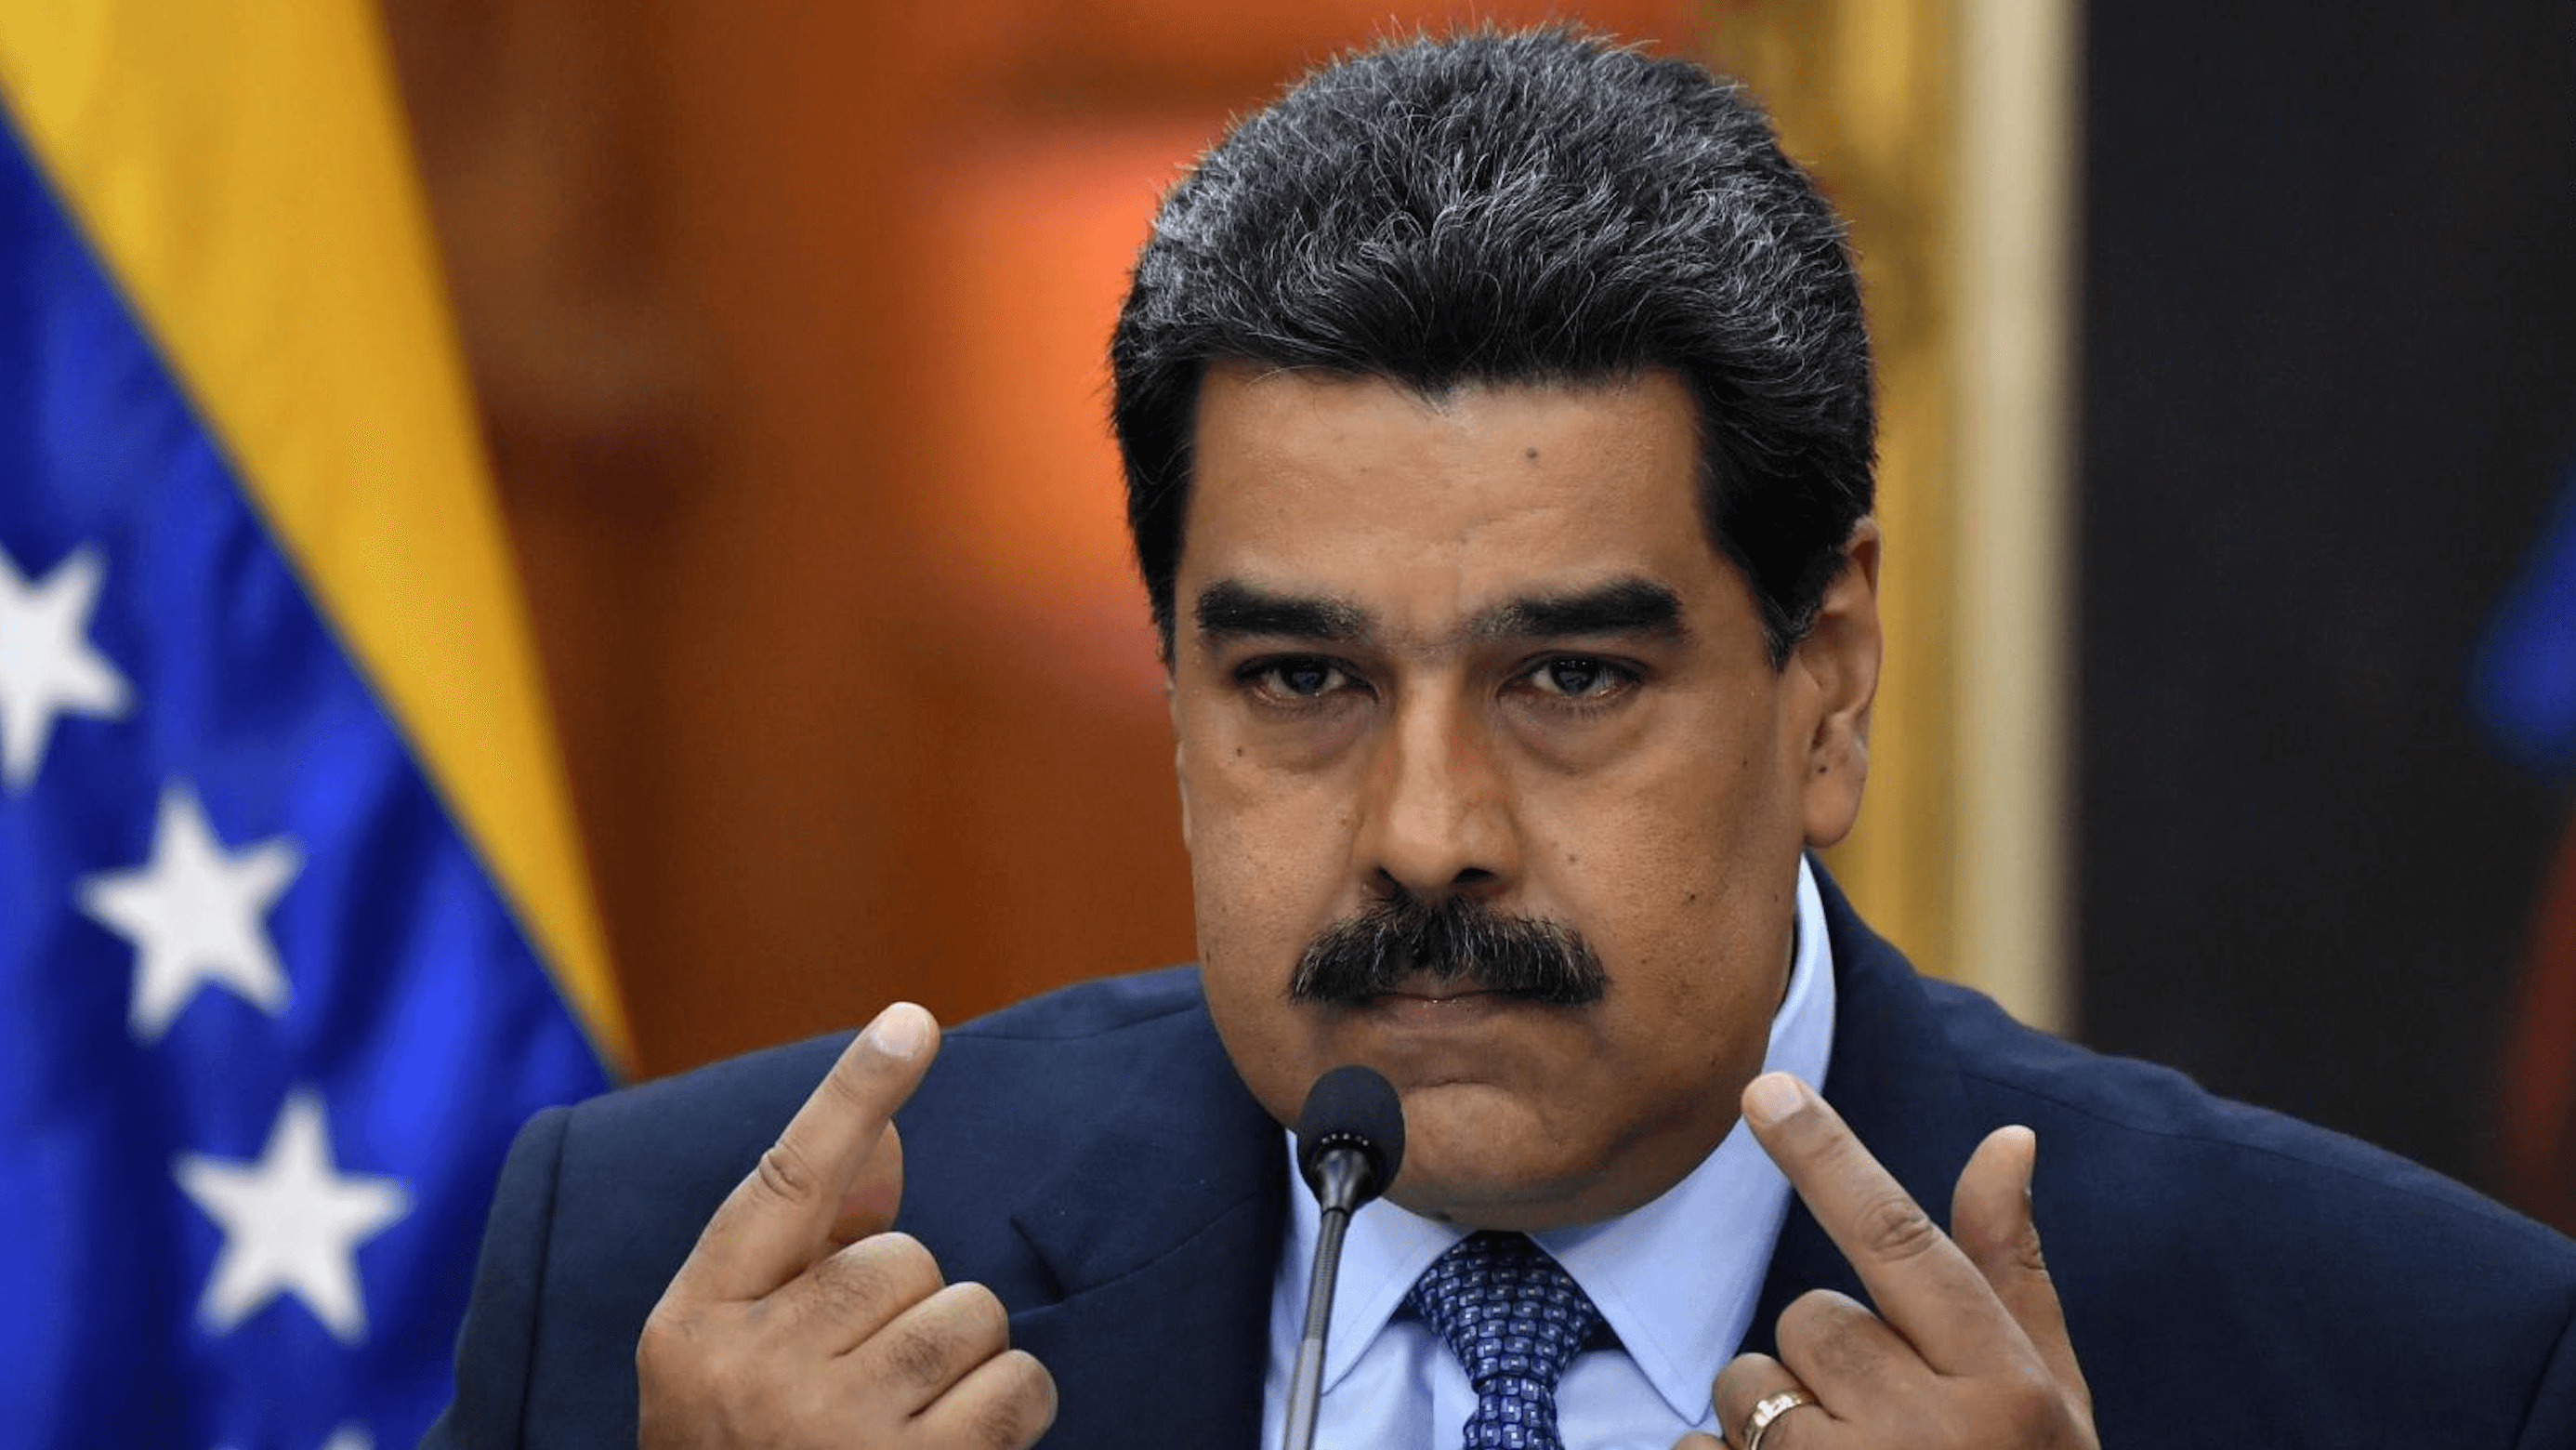 U.S. Government Should Maintain Targeted Sanctions Against Venezuelan Dictator Nicolás Maduro and His Cronies